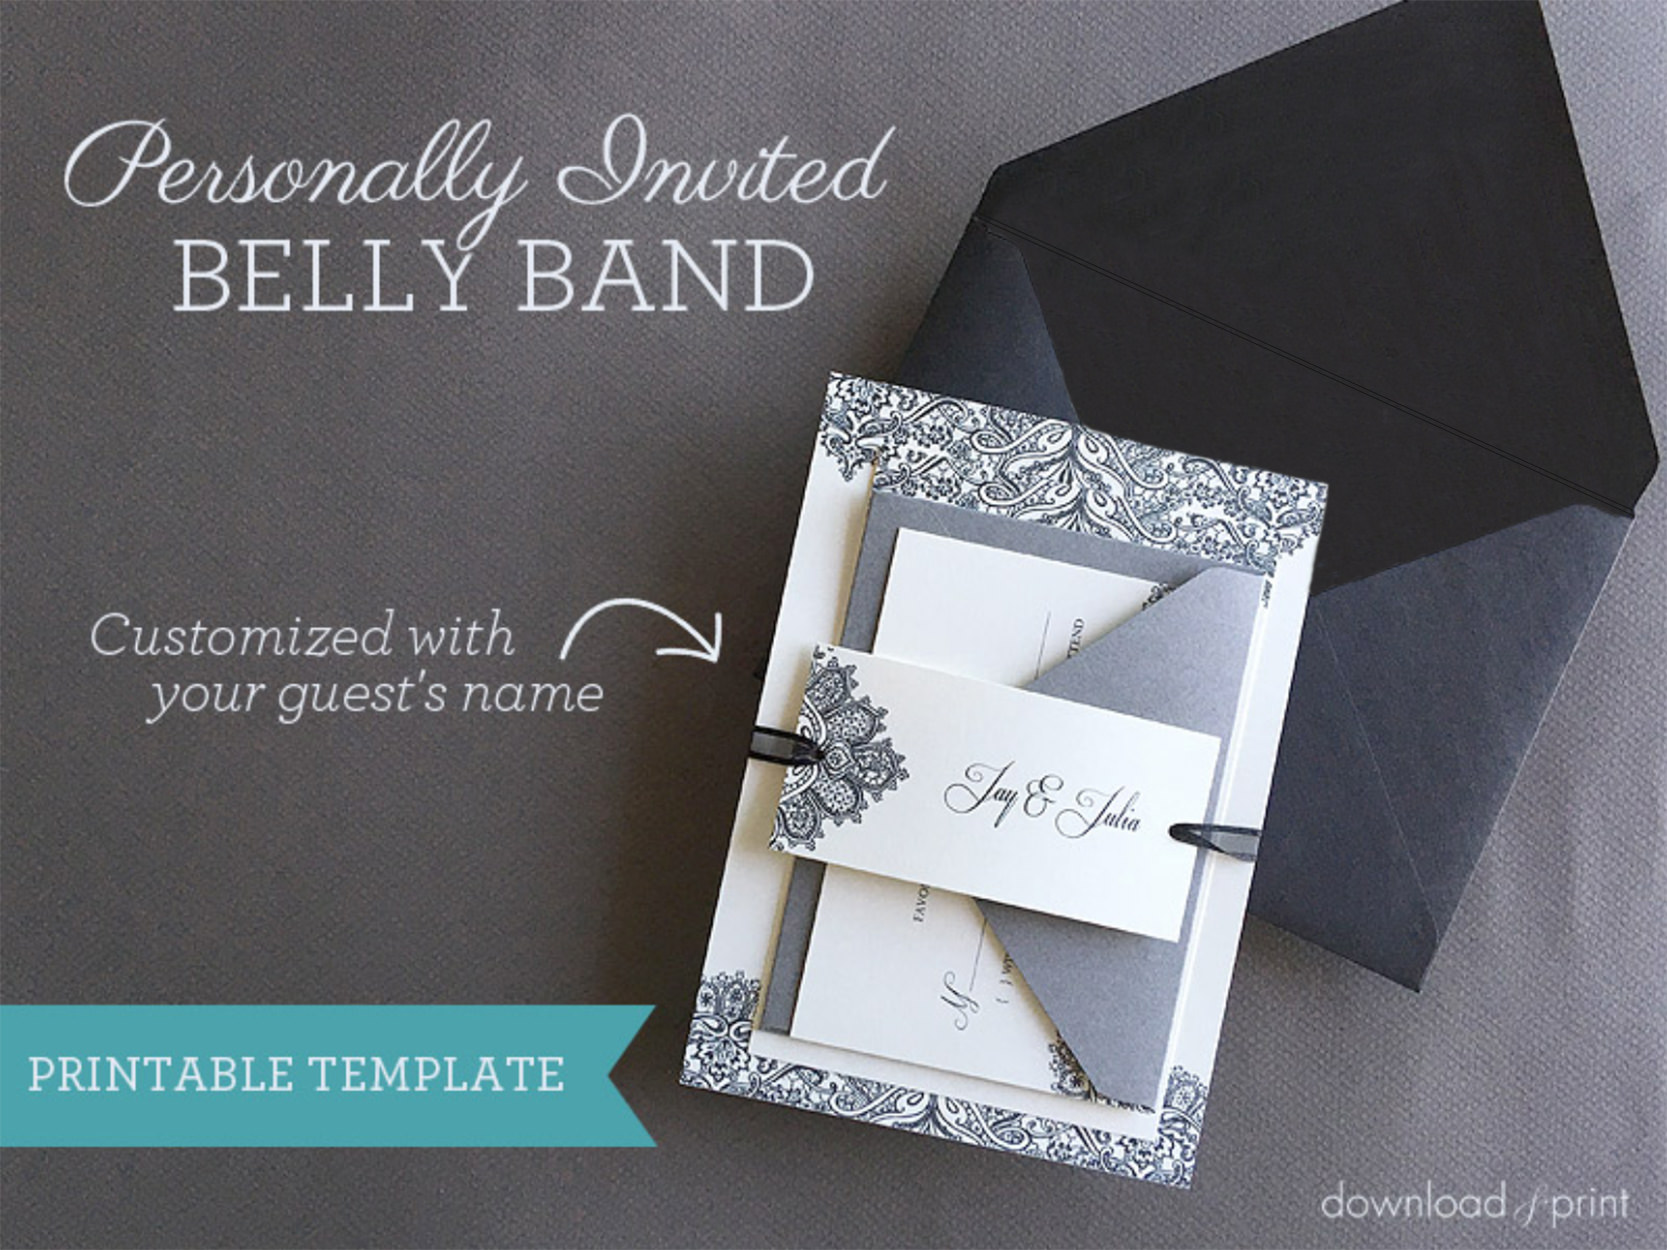 Diy Wedding Invitation Belly Band With Guest Names